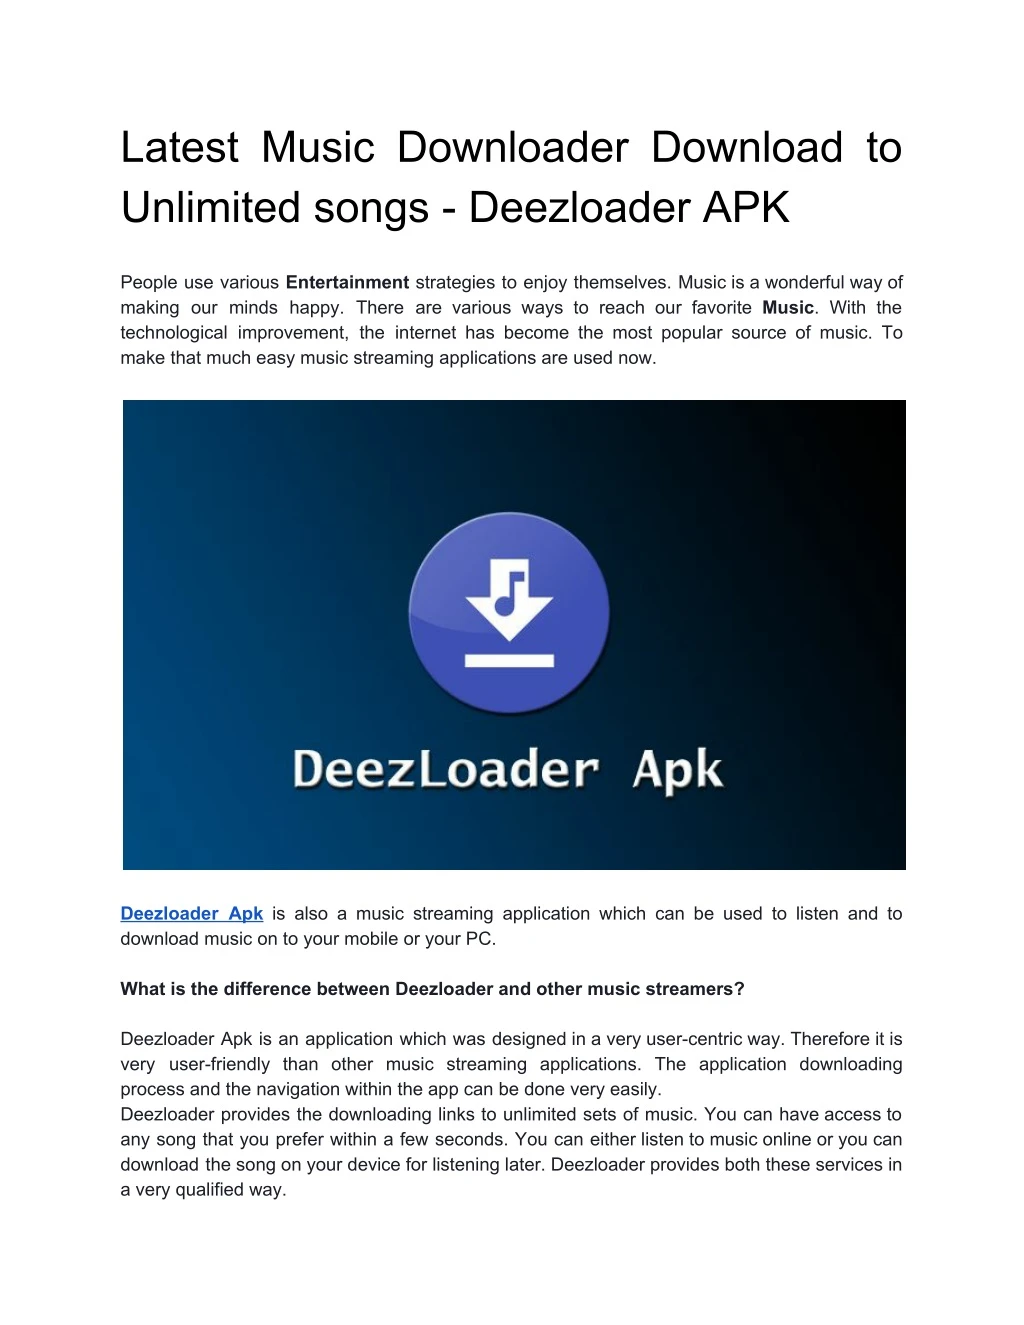 latest music downloader download to unlimited